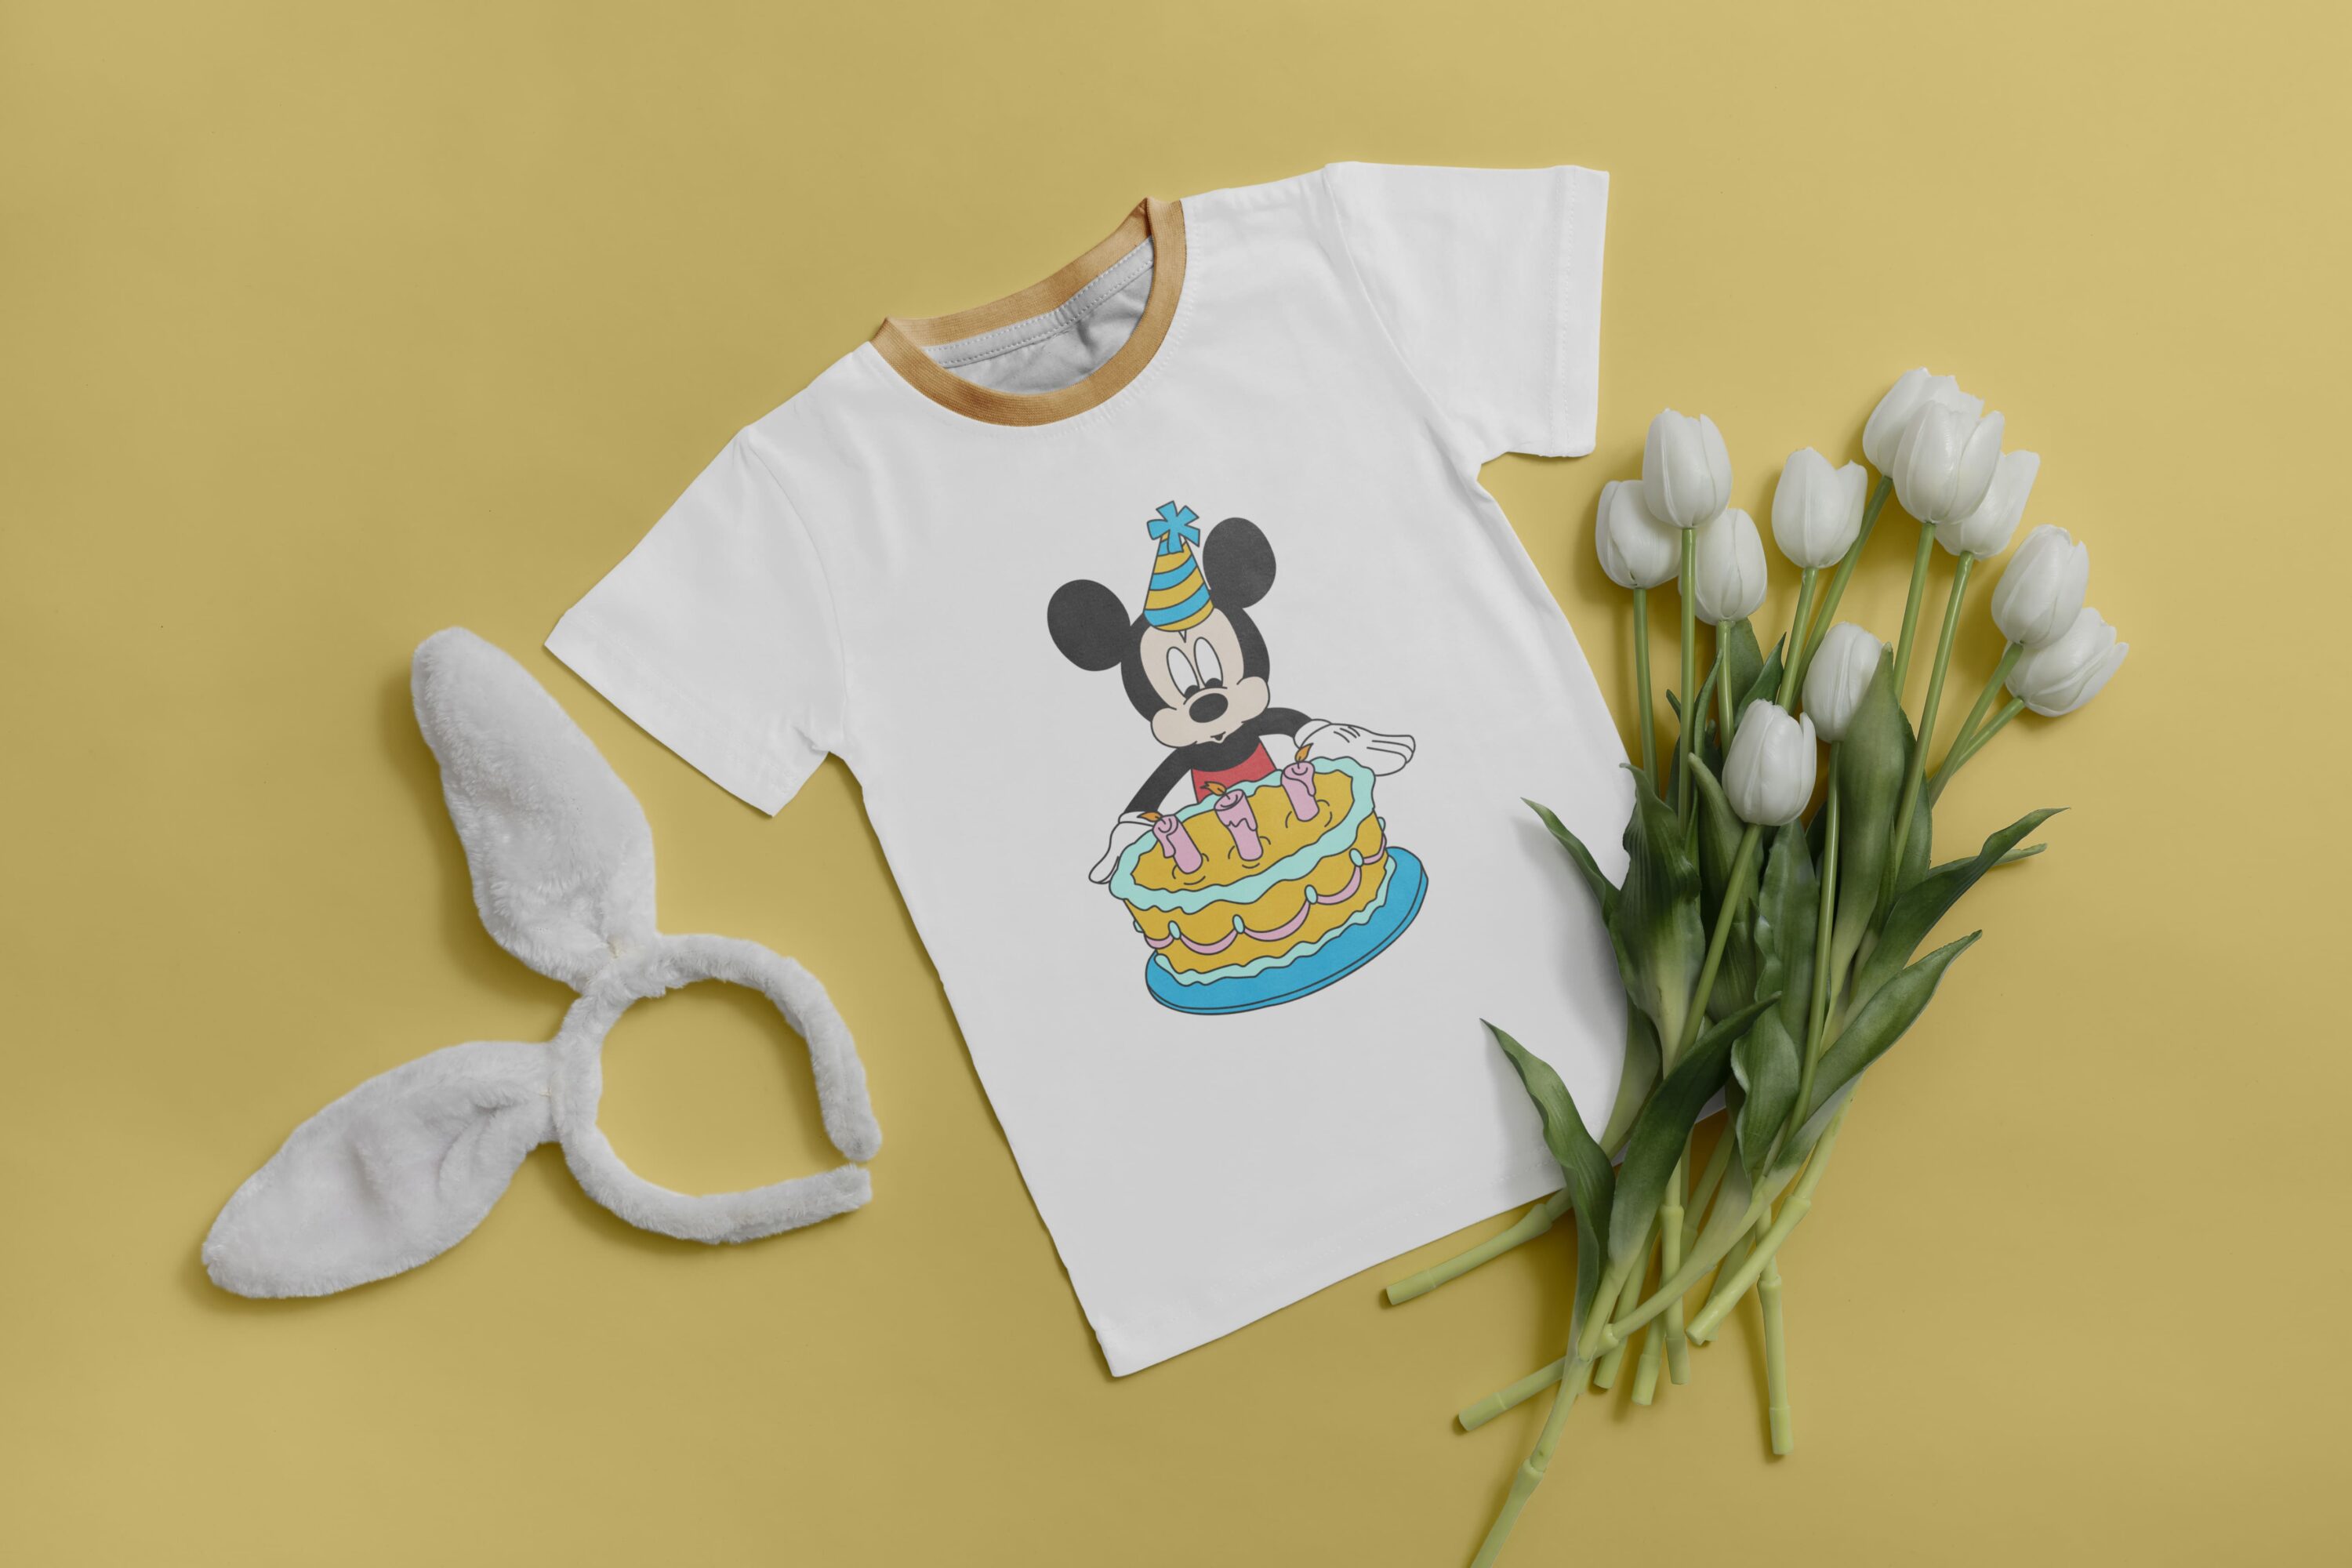 A little Mickey Mouse is ready to celebrate his birthday.